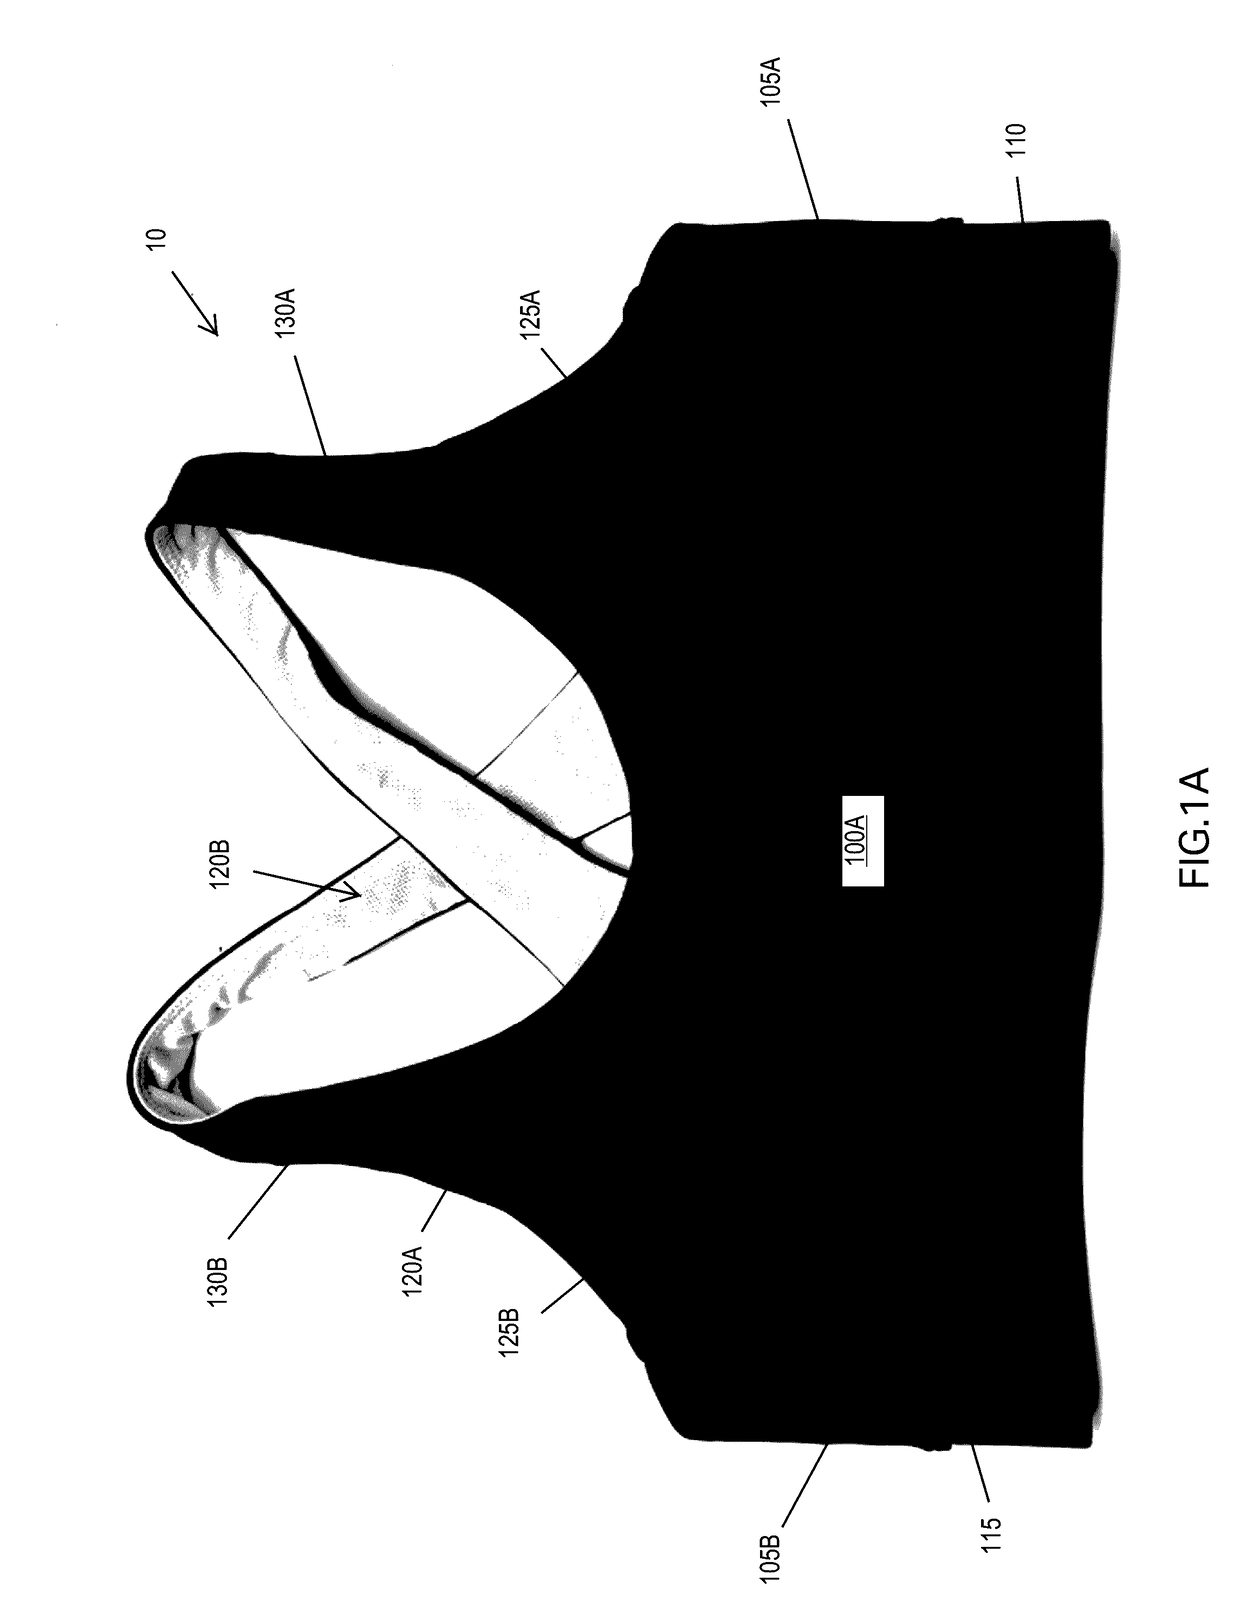 Article of Apparel with Storage System